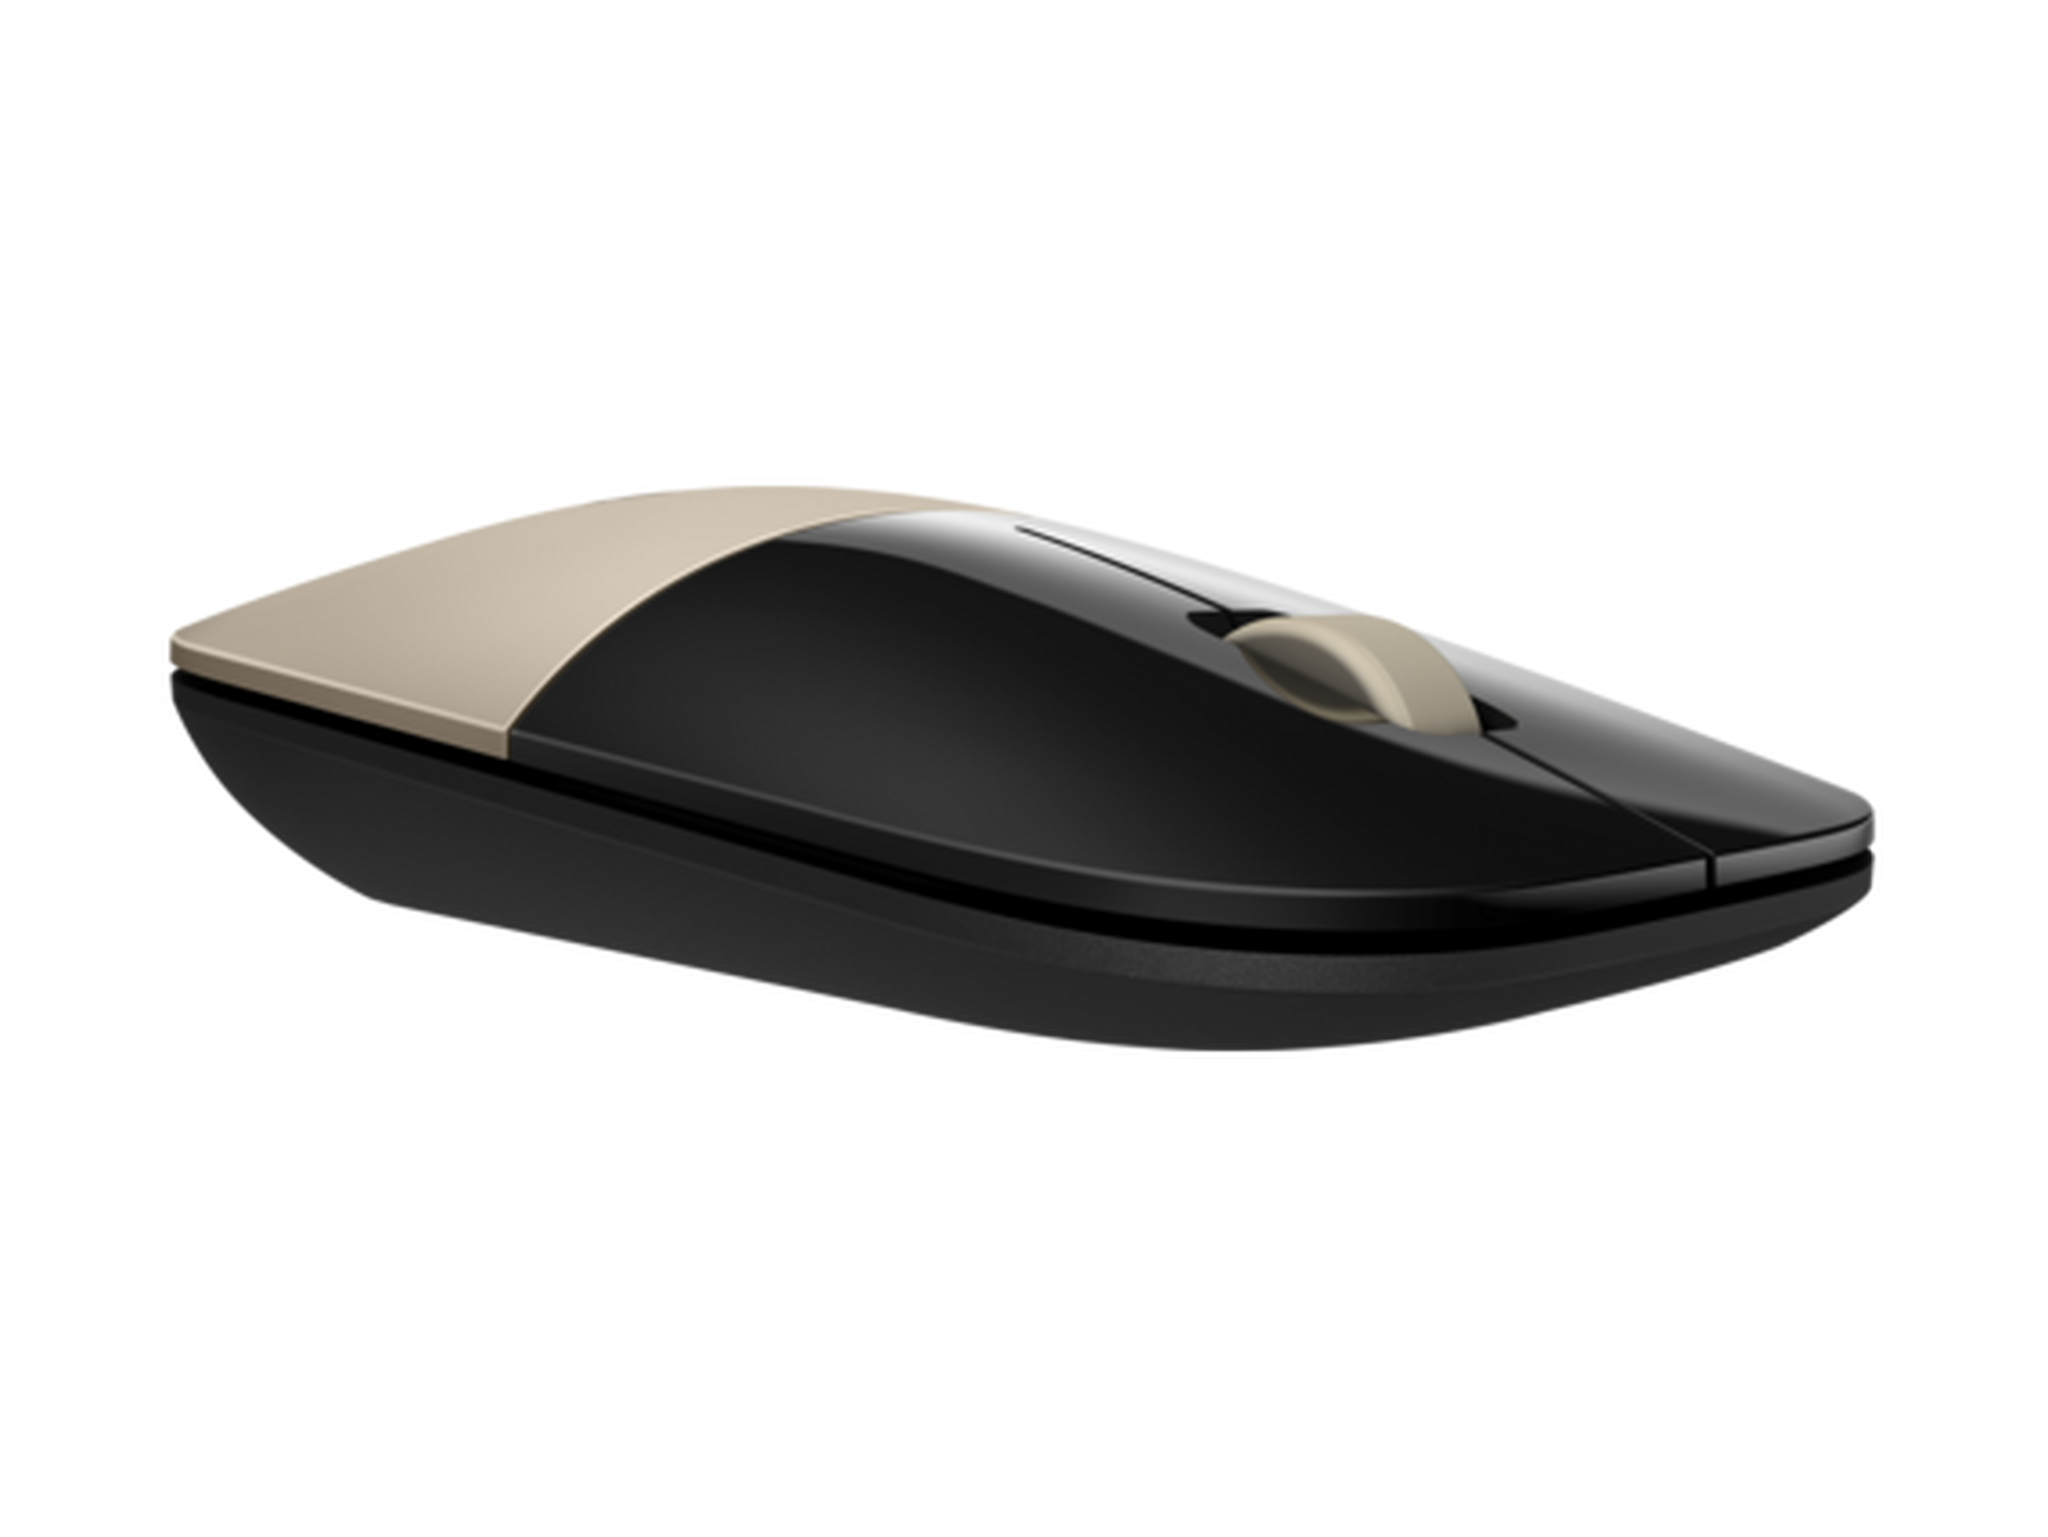 HP Z3700 Wireless USB Mouse (X7Q43AA) – Gold